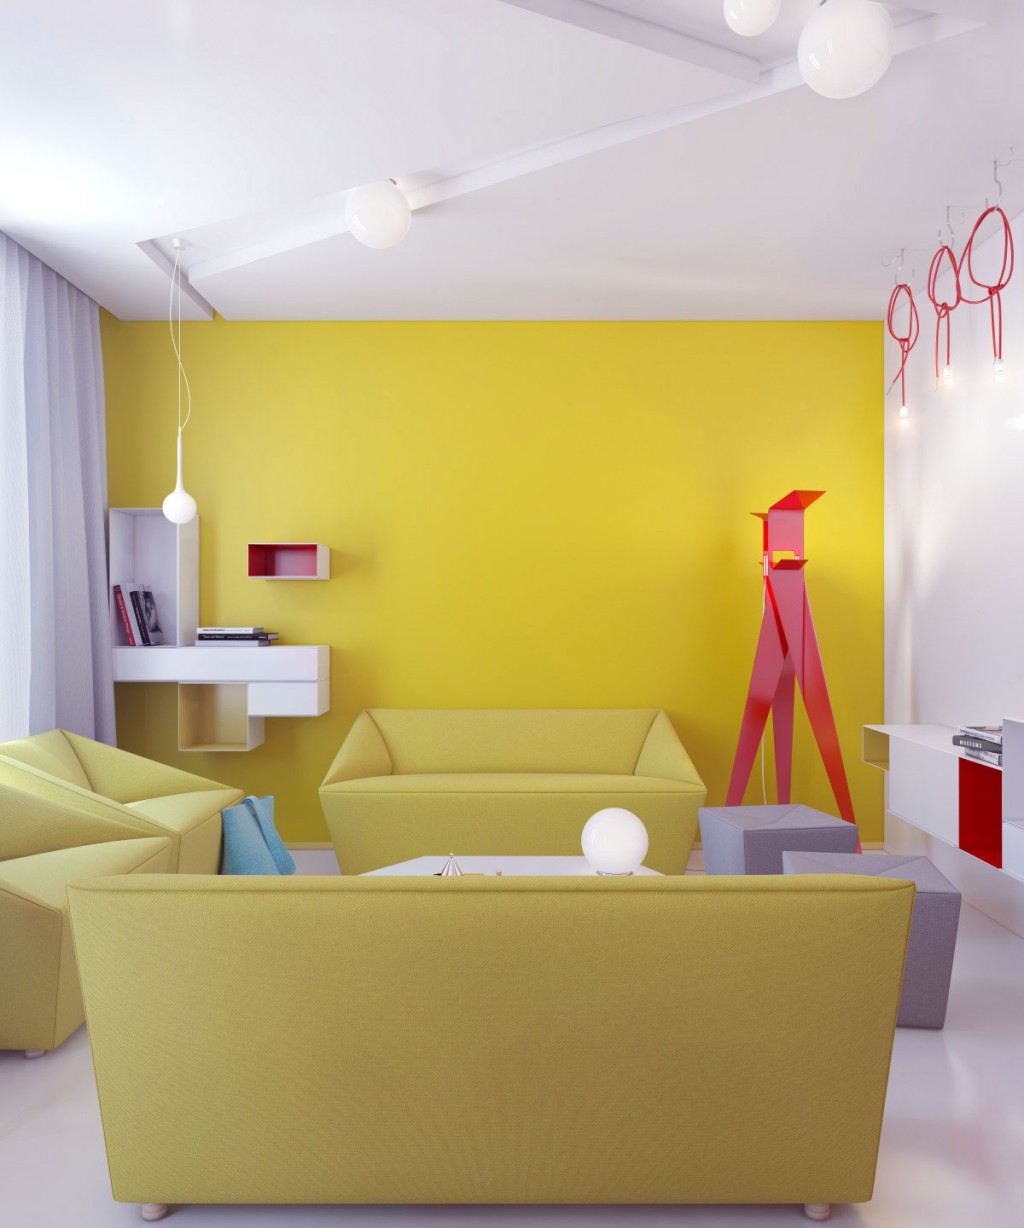 Living Room with Yellow Color and Red Accent